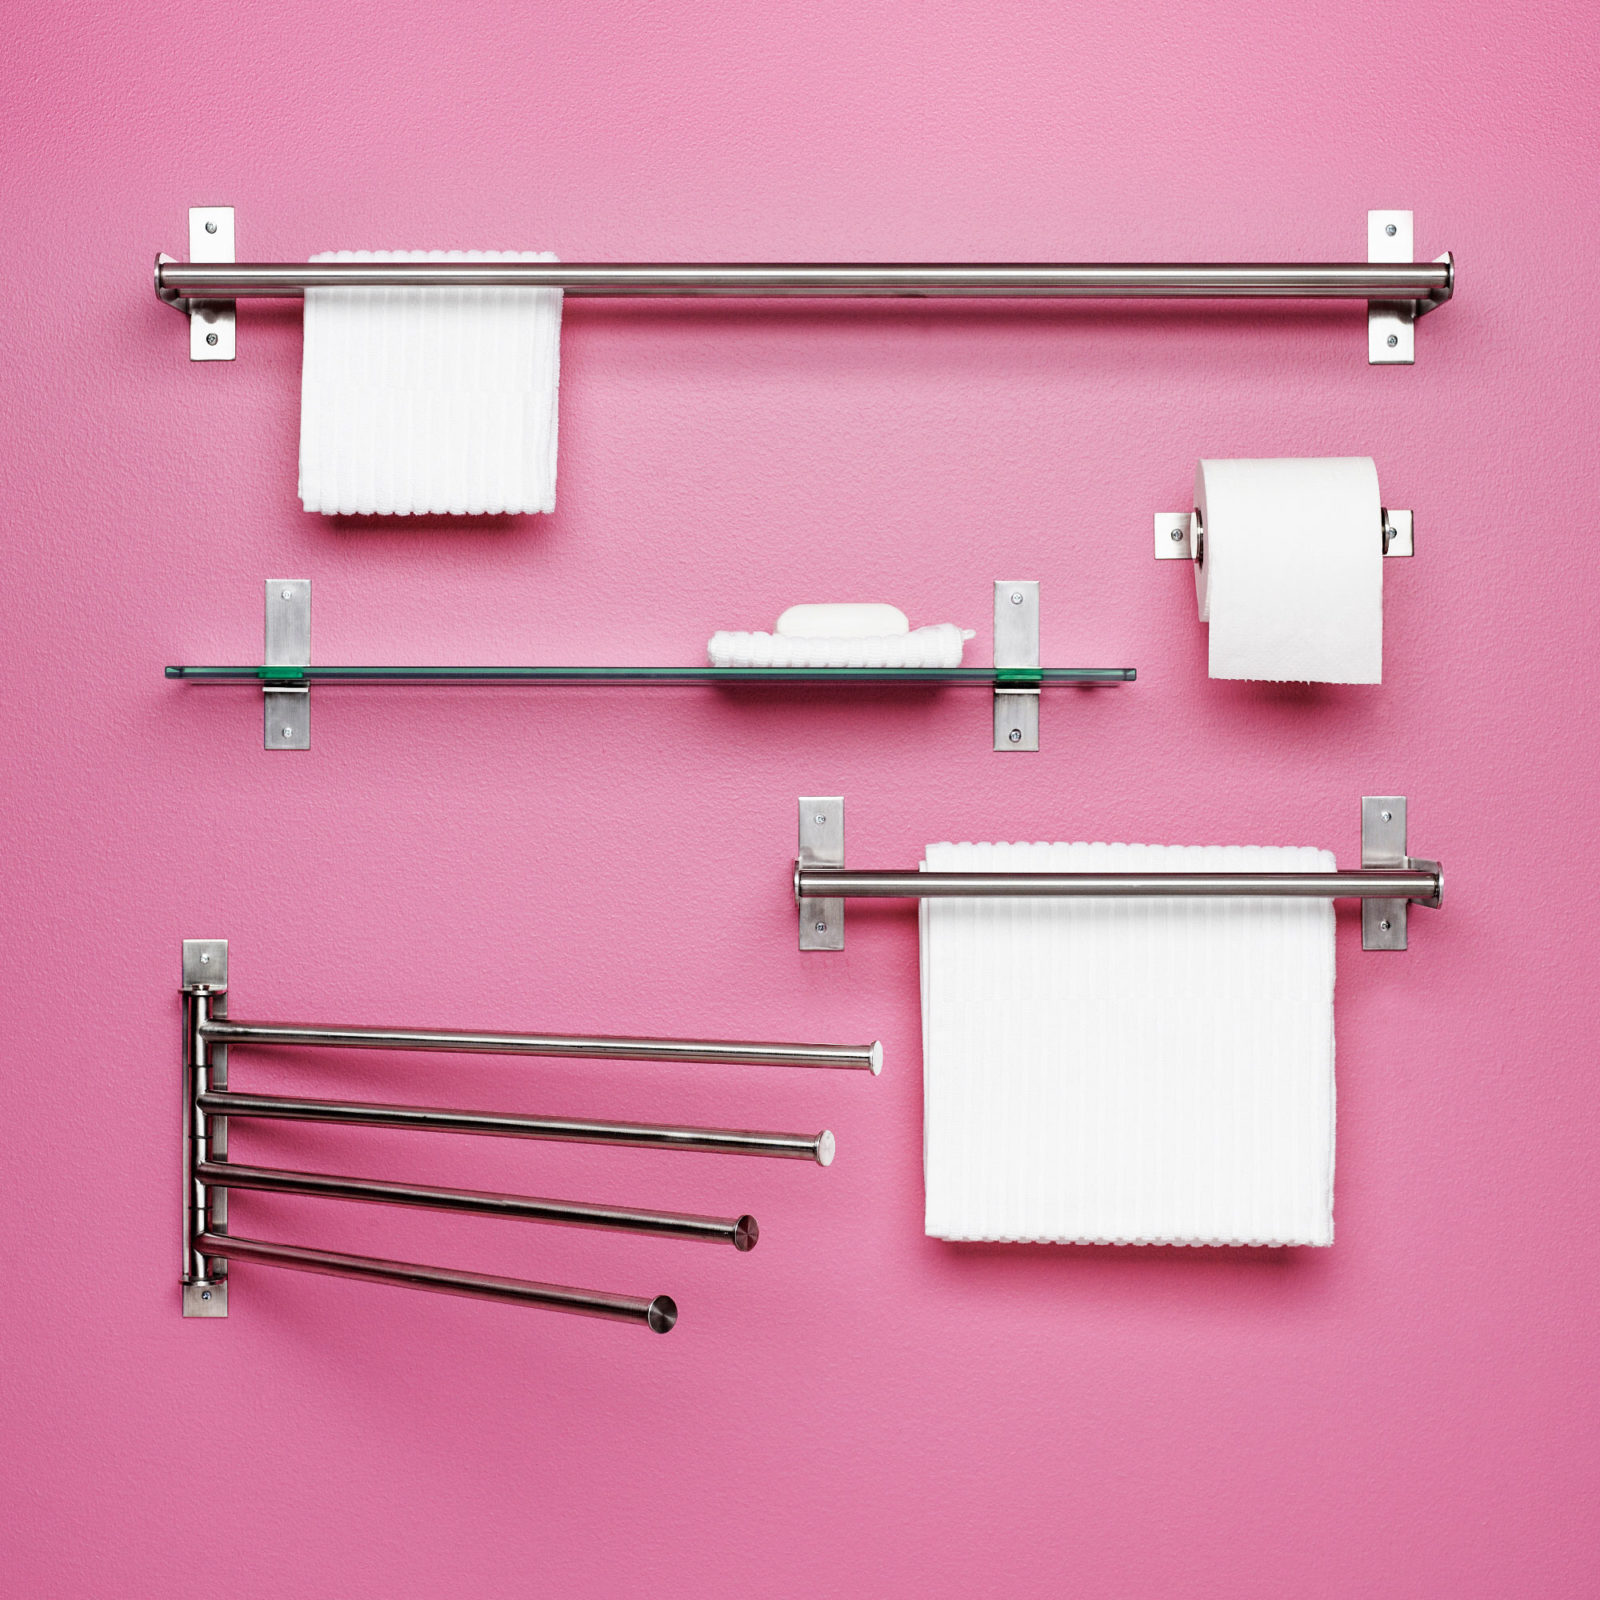 A number of stainless steel bathroom products for hanging things including toilet paper and towels.